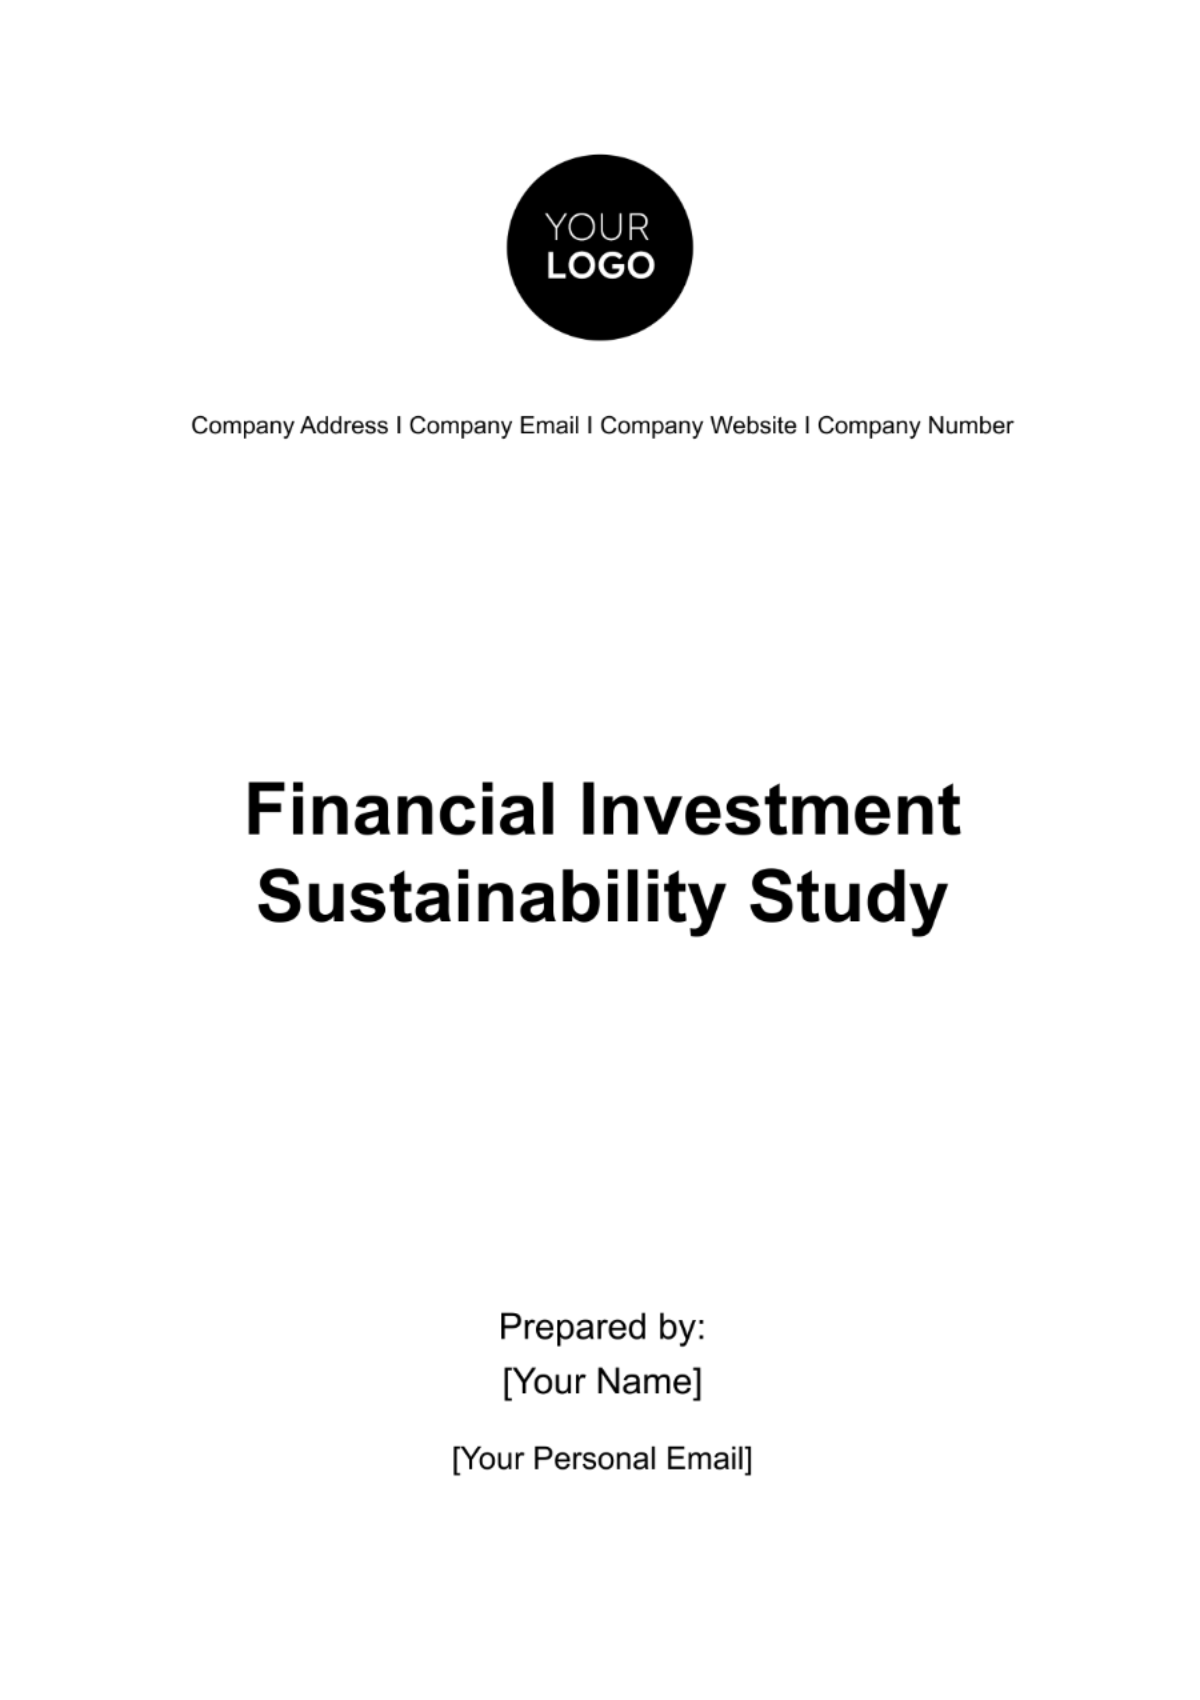 Financial Investment Sustainability Study Template